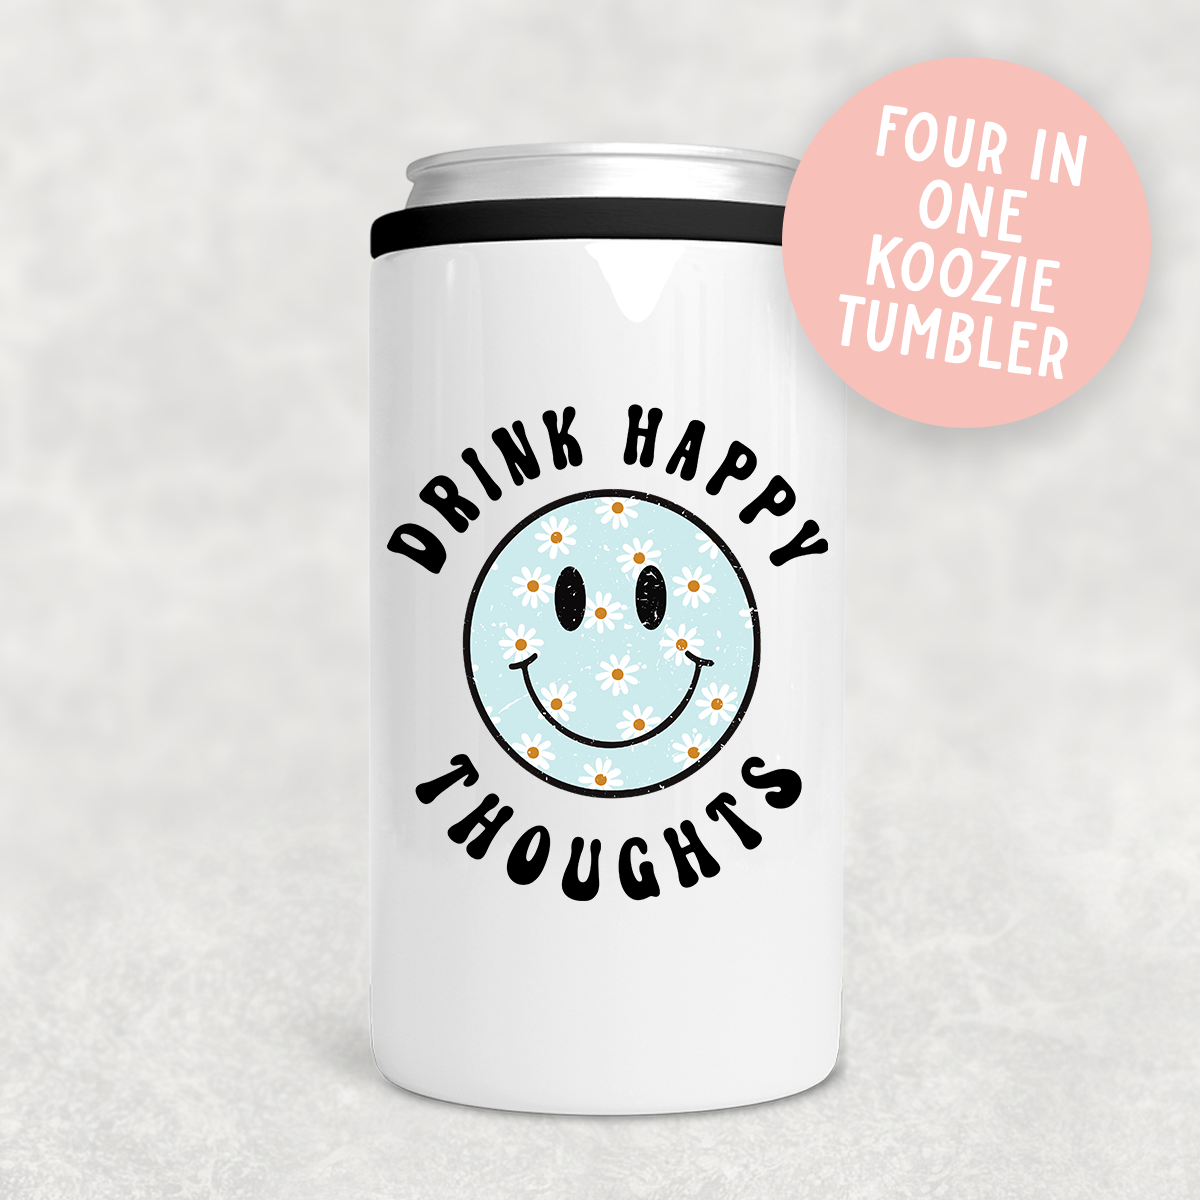 Drink Happy Thoughts Blue 4 in 1 Tumbler